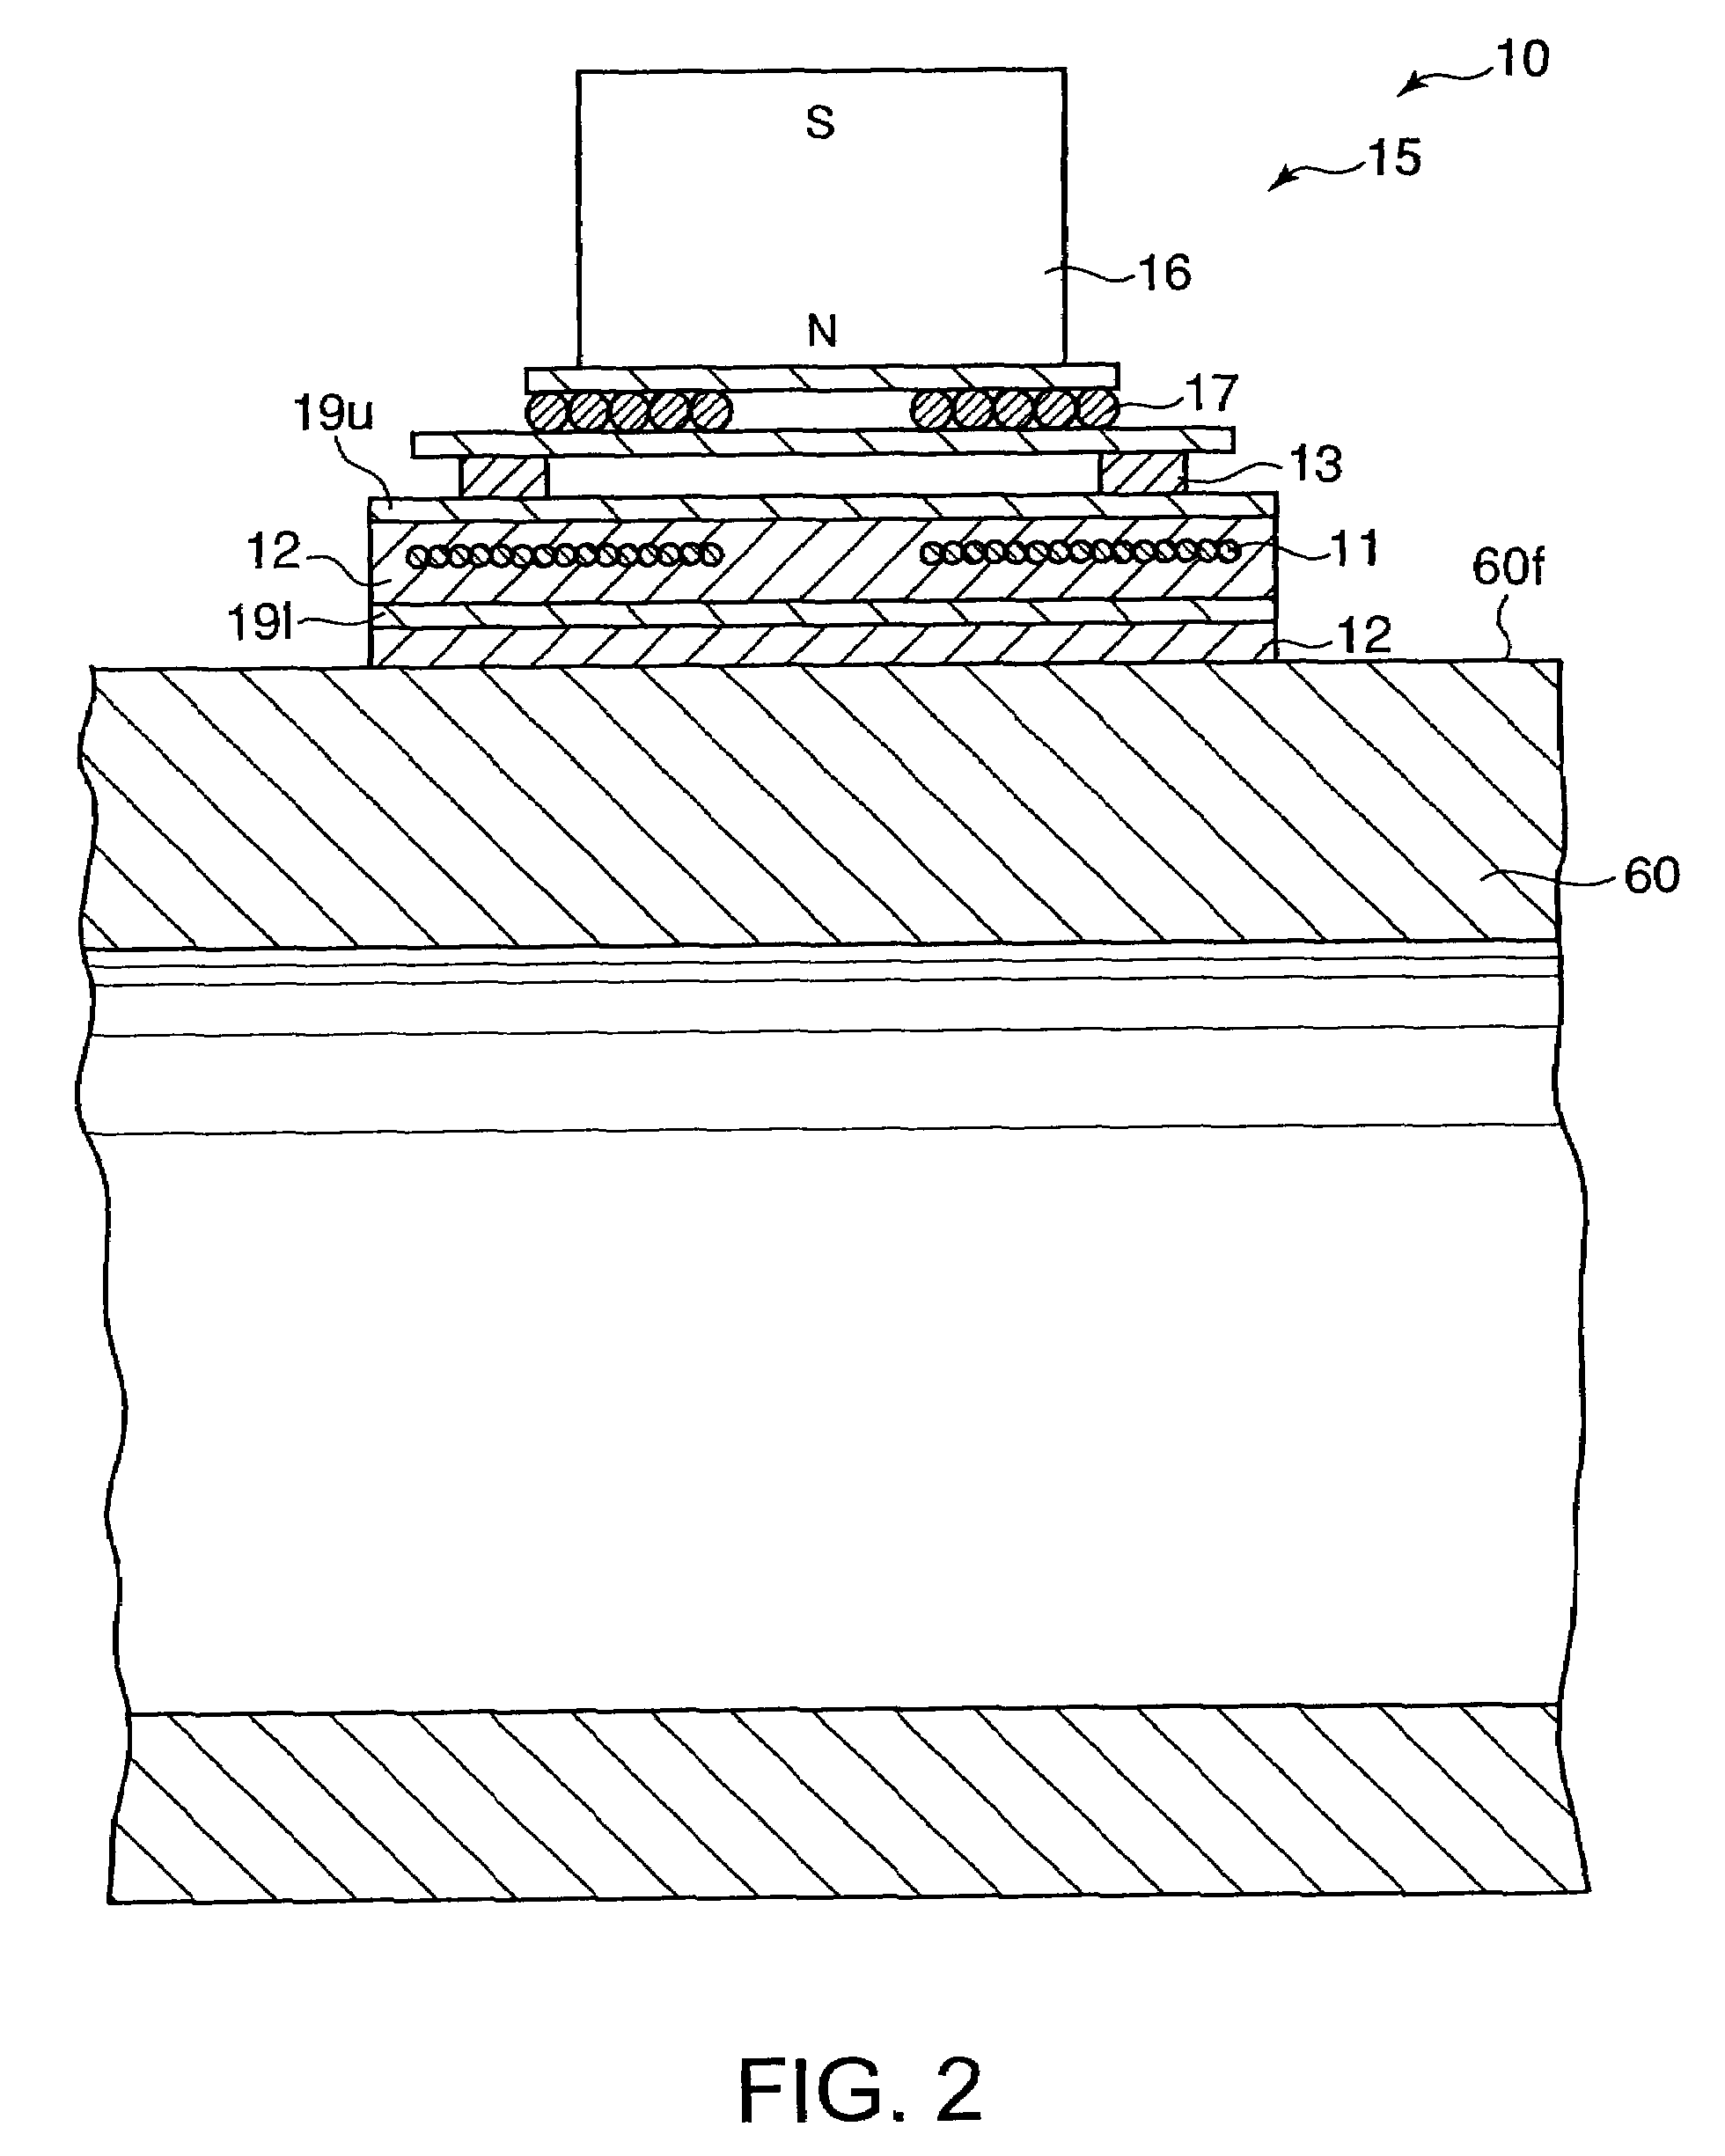 Active sensor, multipoint active sensor, method for diagnosing deterioration of pipe, and apparatus for diagnosing deterioration of pipe, and apparatus for diagnosis deterioration of pipe